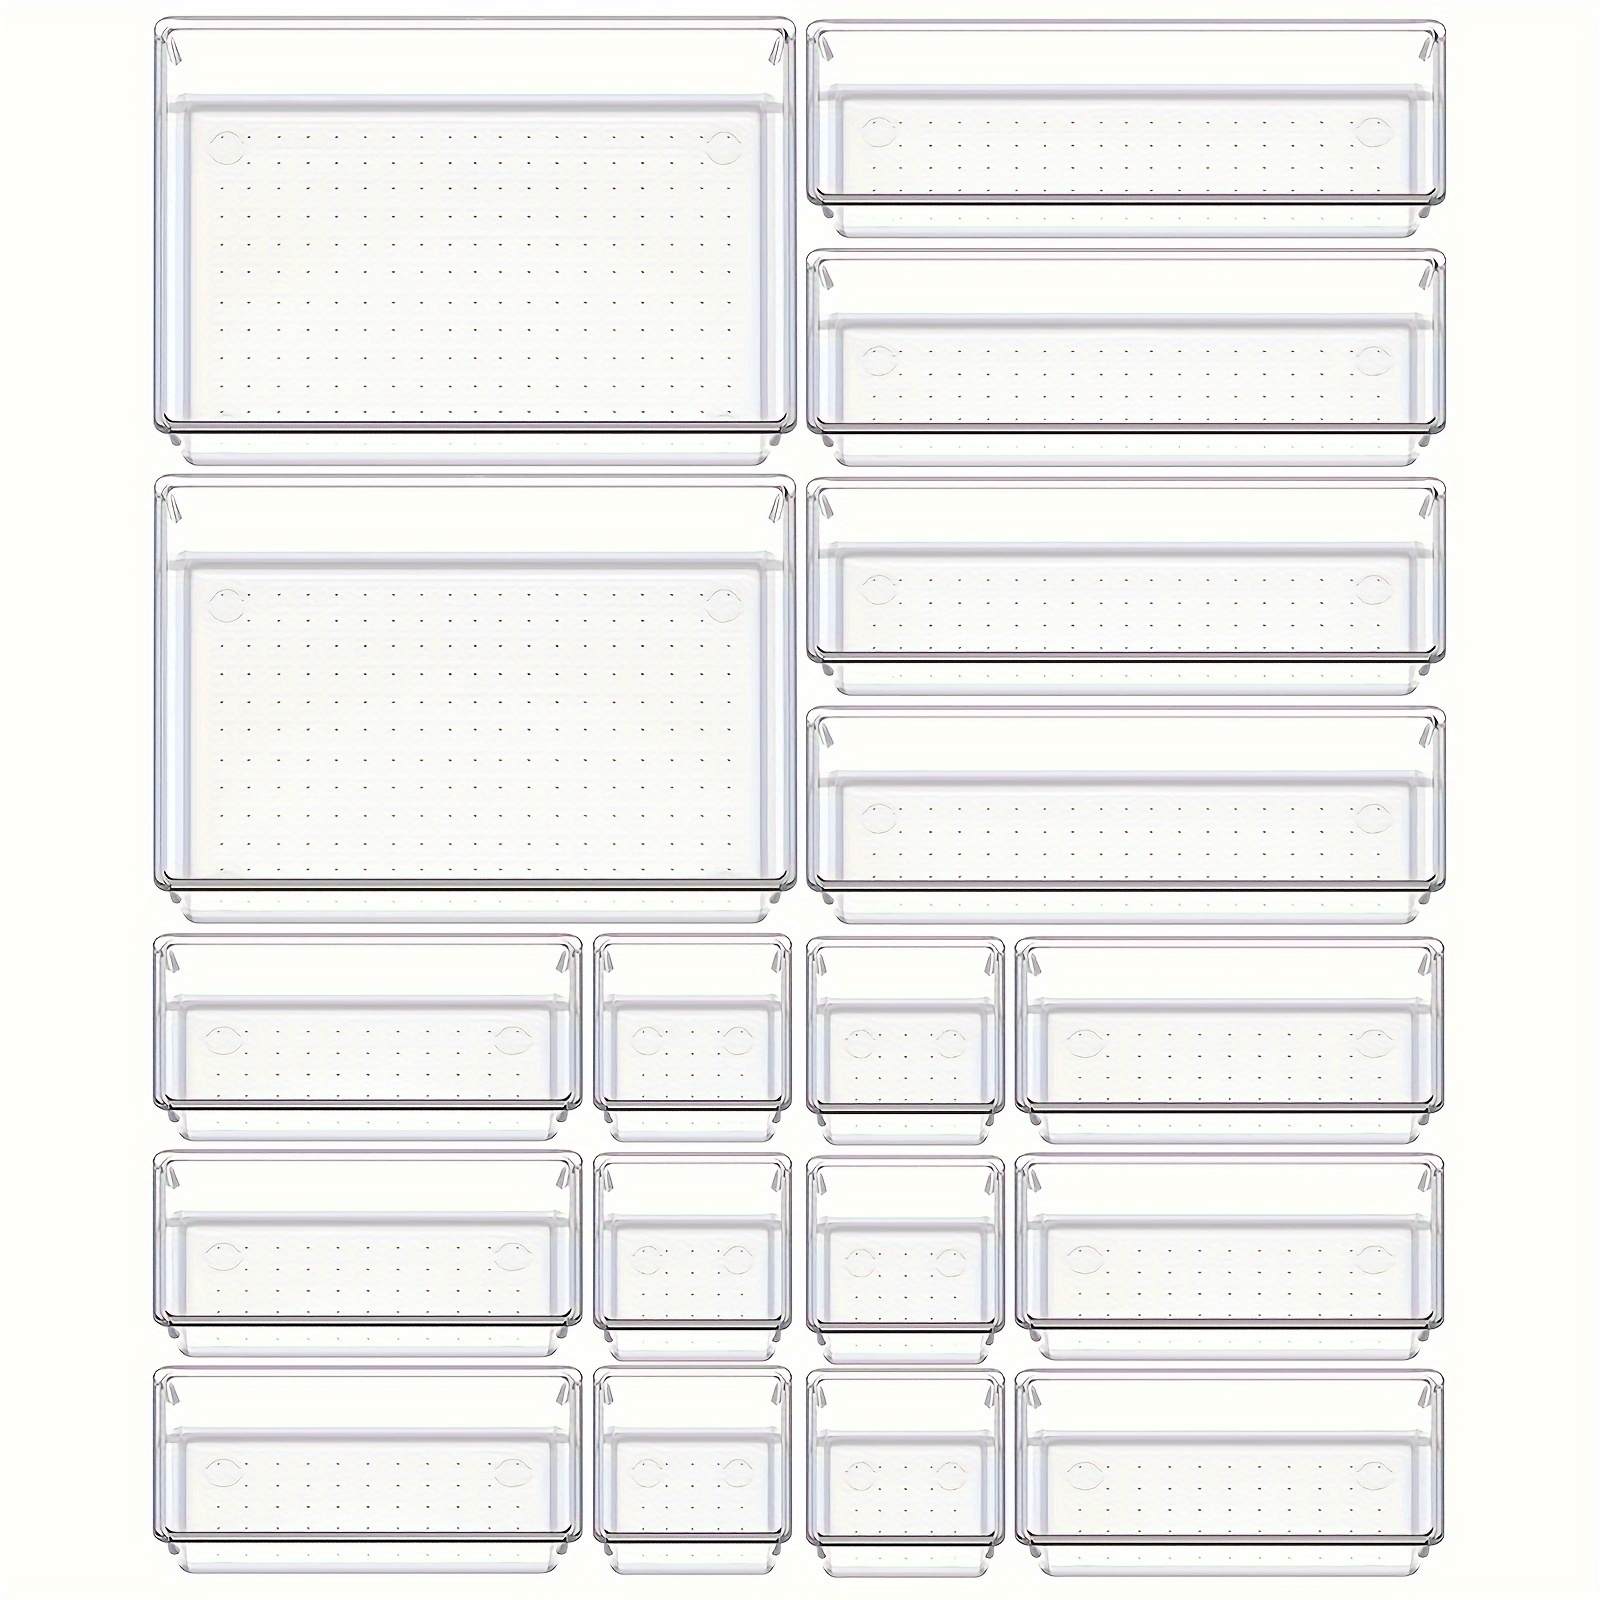 

Rv Table And Desktop Organizers: 18 Clear Plastic Storage Bins For Bathroom, Bedroom, Dresser, Makeup, Kitchen Utensils, And Office Supplies - Suitable For Rv Interior Decor And Functionality